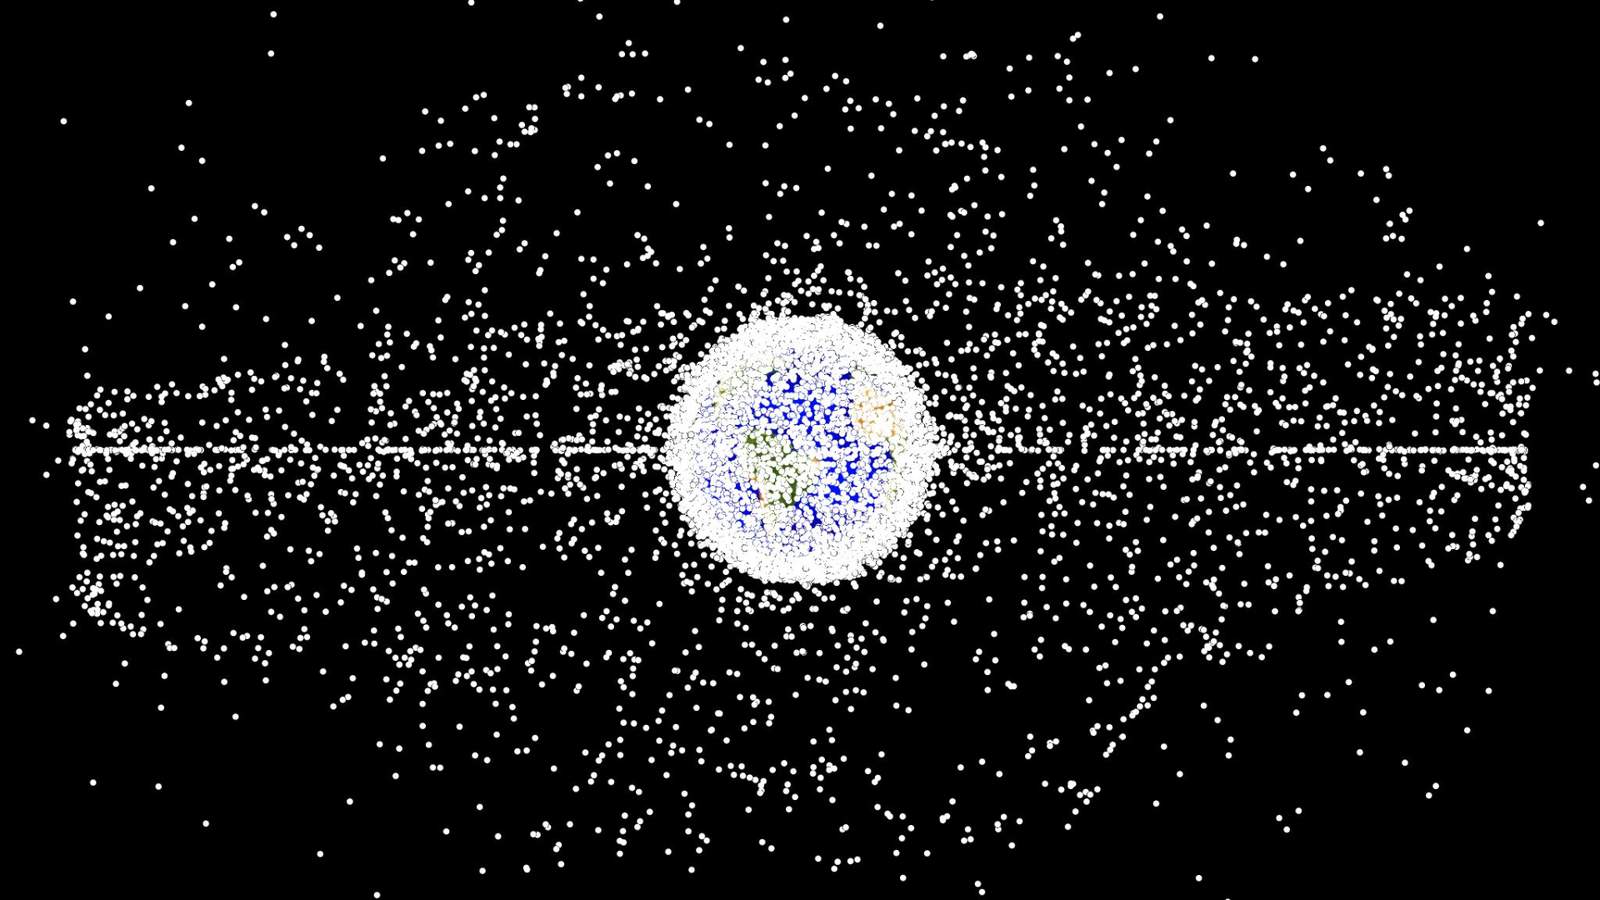 Space Curious: Space debris is growing, here’s what’s being done about it